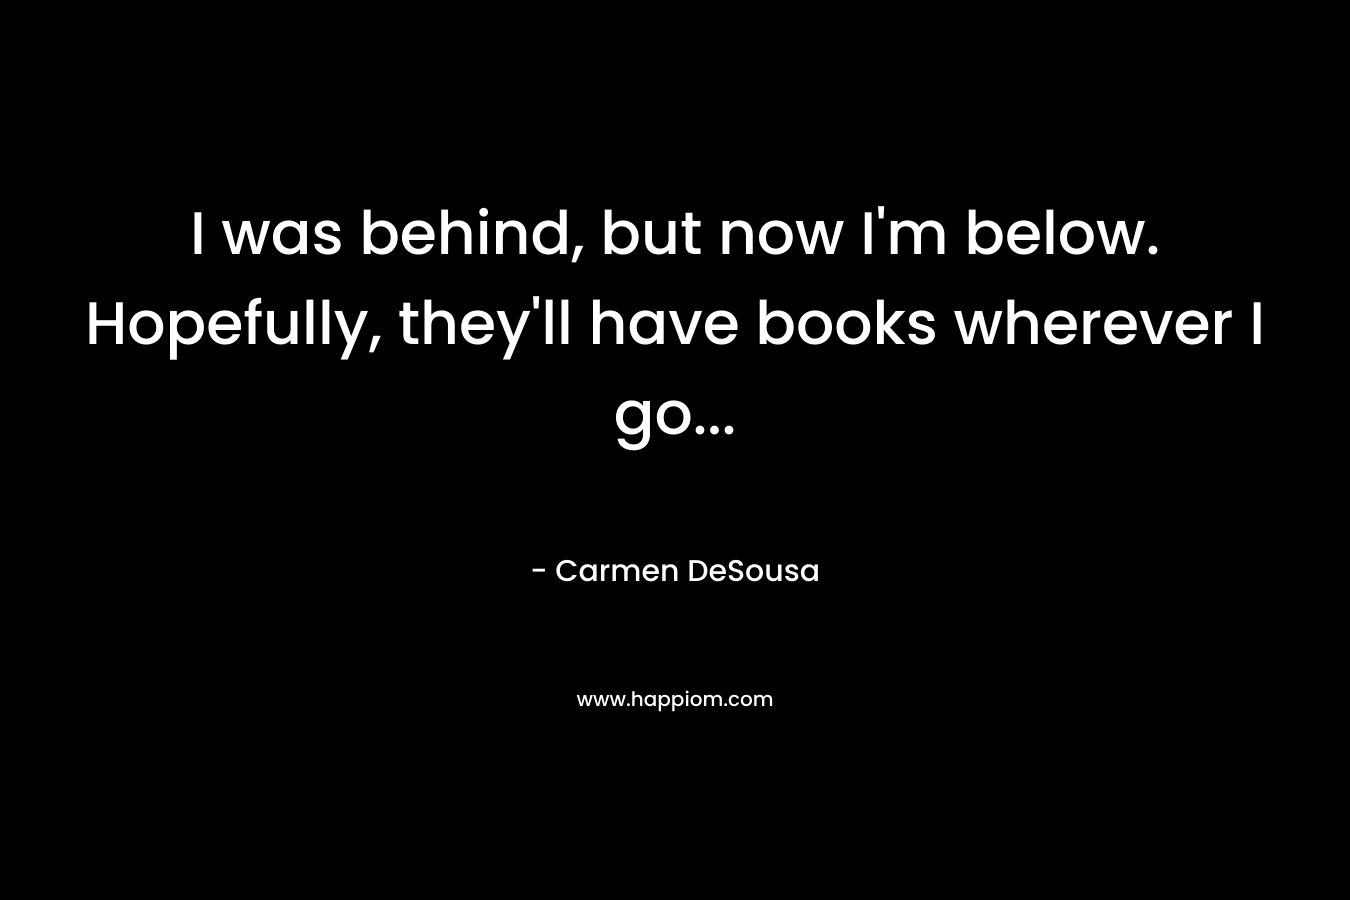 I was behind, but now I'm below. Hopefully, they'll have books wherever I go...